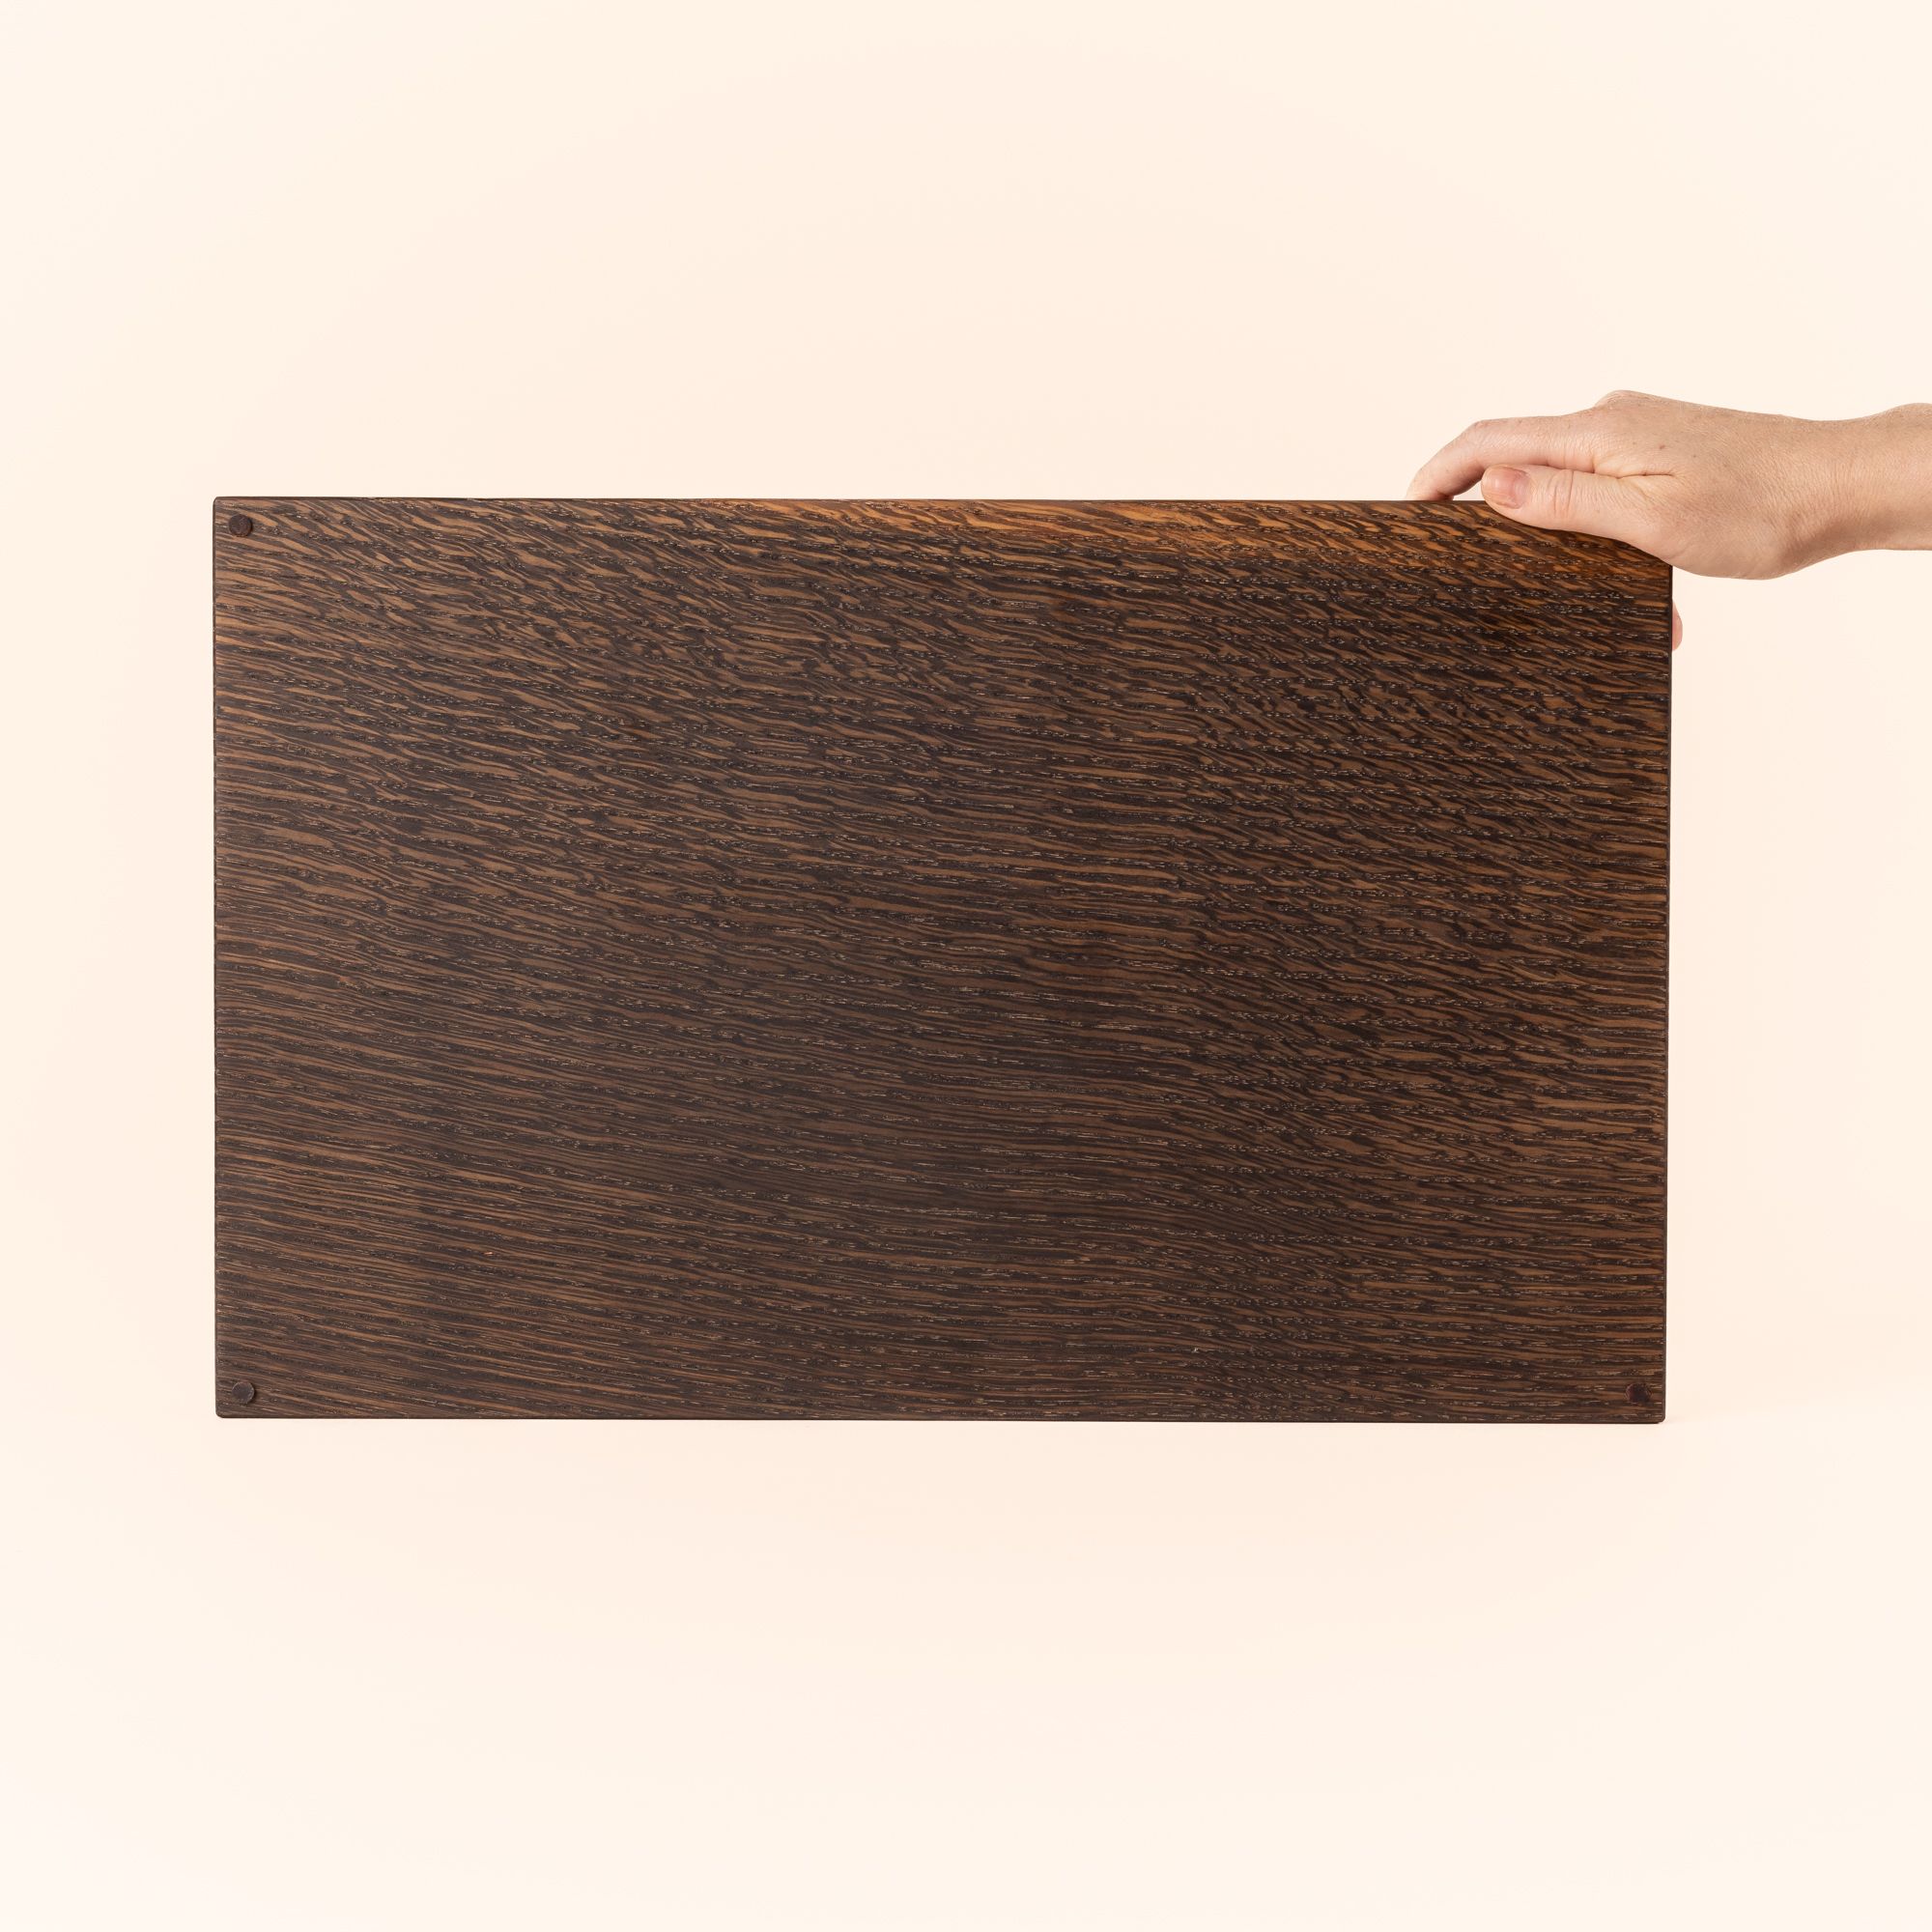 A hand holds up a rectangle of wood that has been finished in an ebonized stain